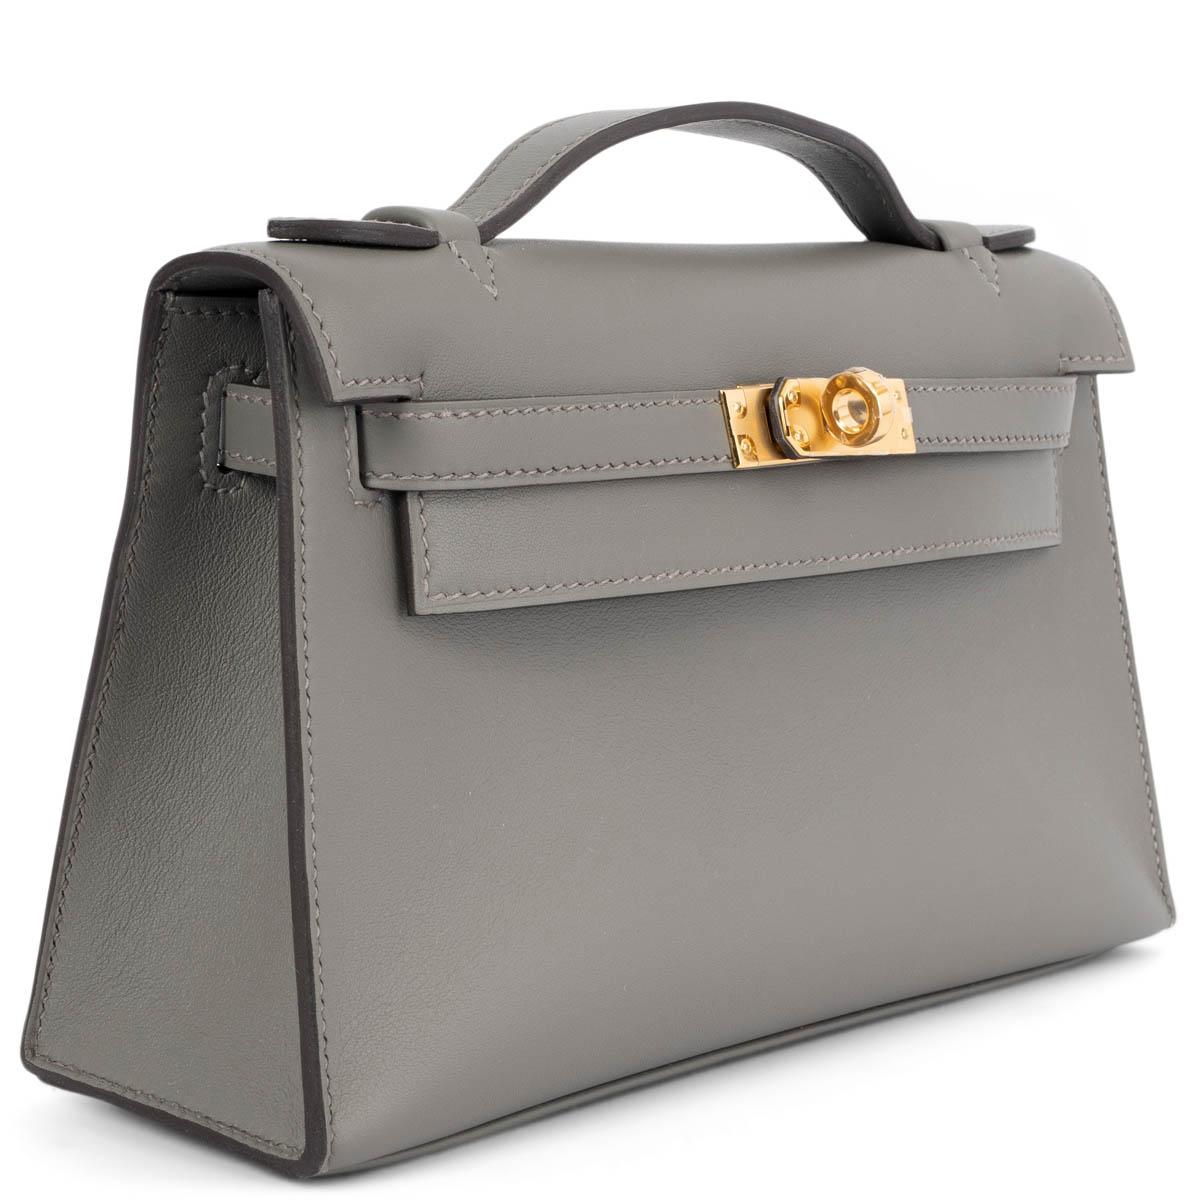 100% authentic Hermès Kelly Pochette clutch in Gris Meyer (grey) Veau Swift leather with gold-tone hardware. Lined in Chevre (goat skin) with an open pocket against the back. Brand new comes with full set. 

Measurements
Height	13cm